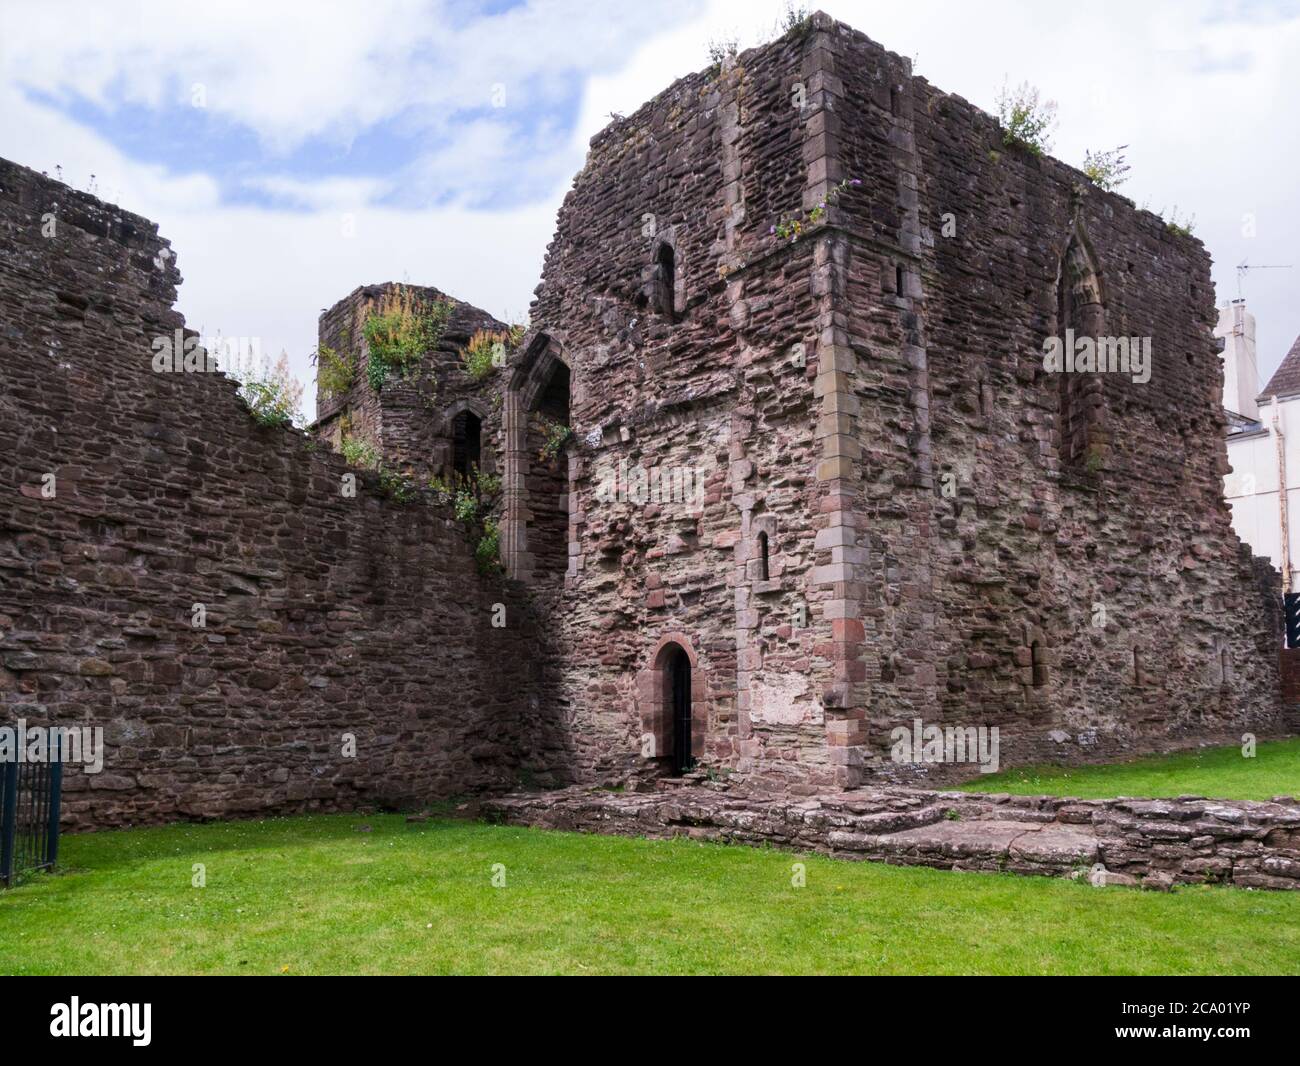 Ruins of Great Tower and Hall Monmouth Castle Monmouthshire South Wales Uk built by William FitzOsbern 1st Earl of Hereford in 1067 on Heritage Trail Stock Photo